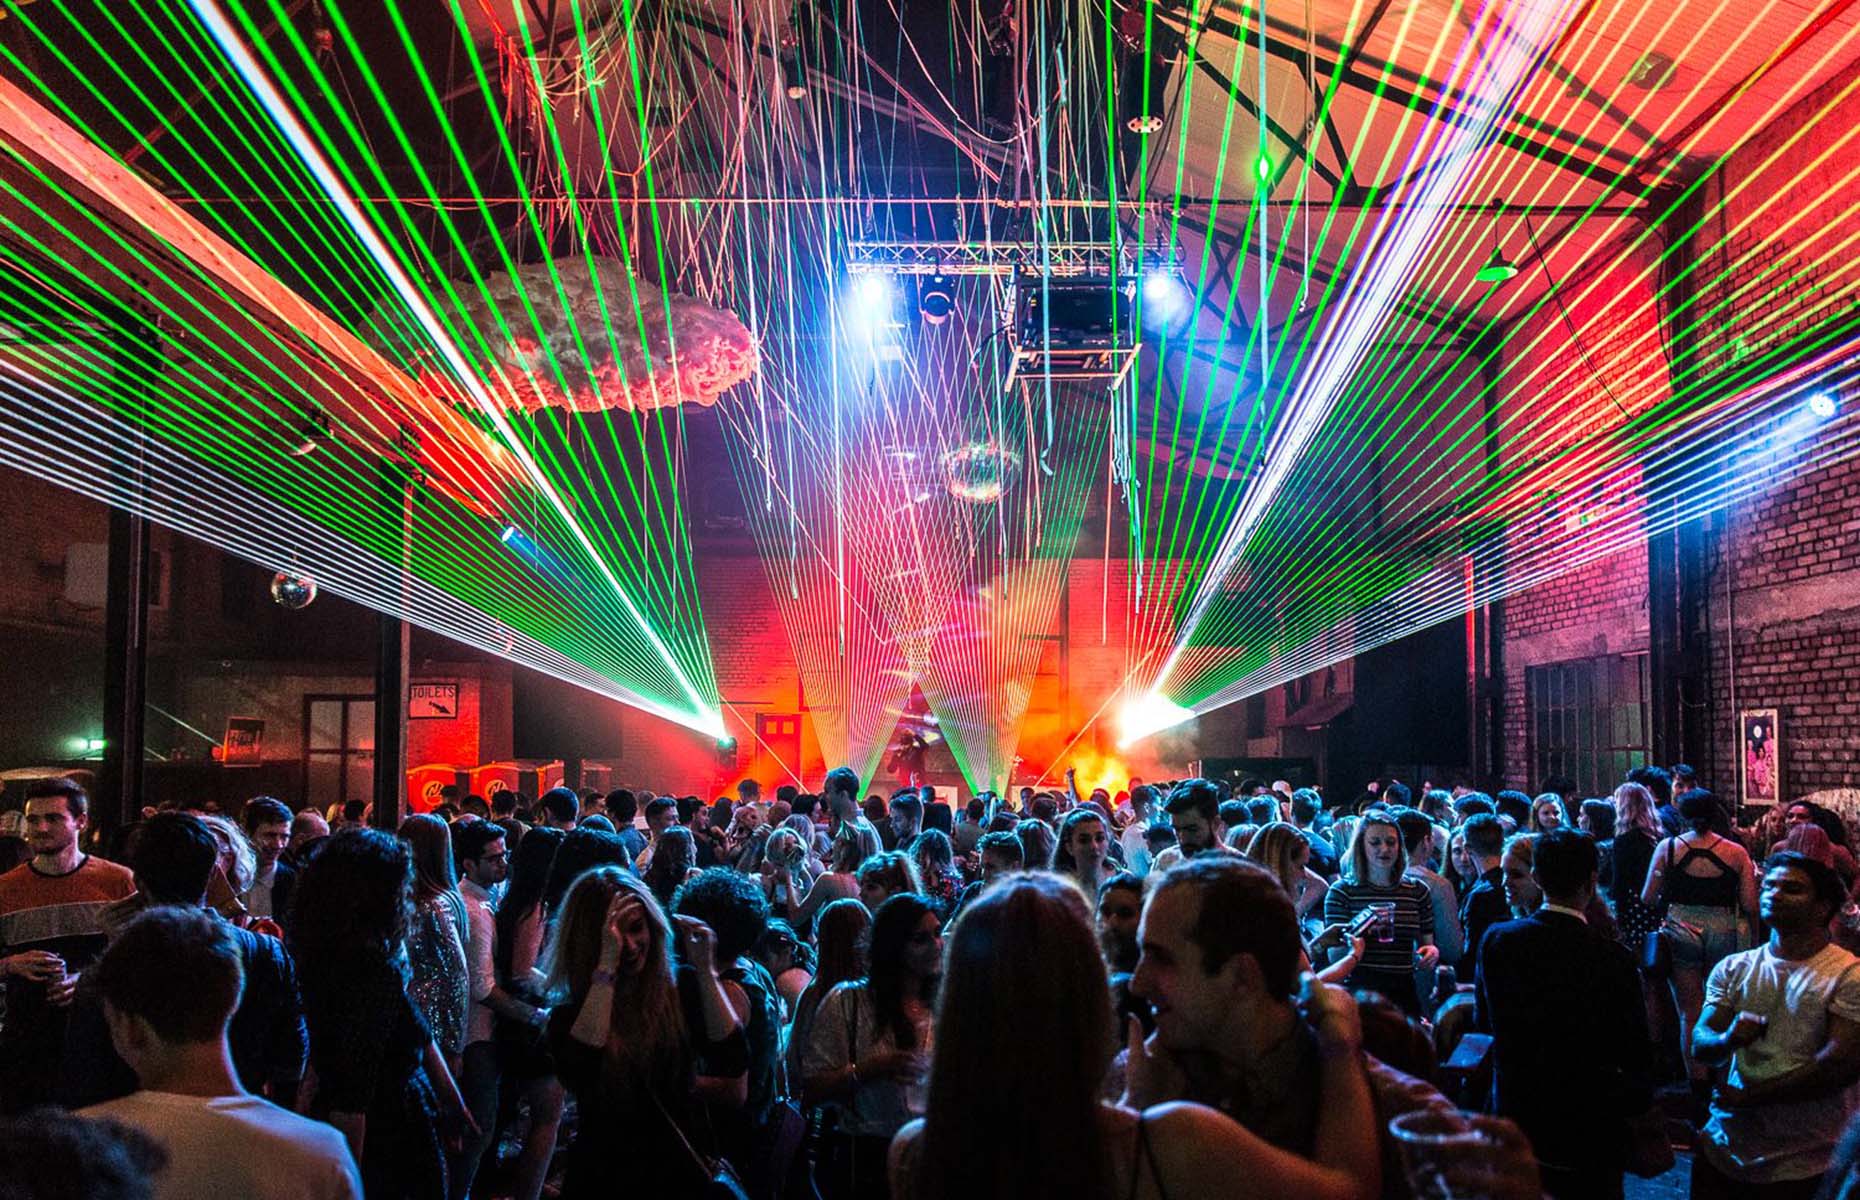 Camp and Furnace in Liverpool (Image: Camp and Furnace)